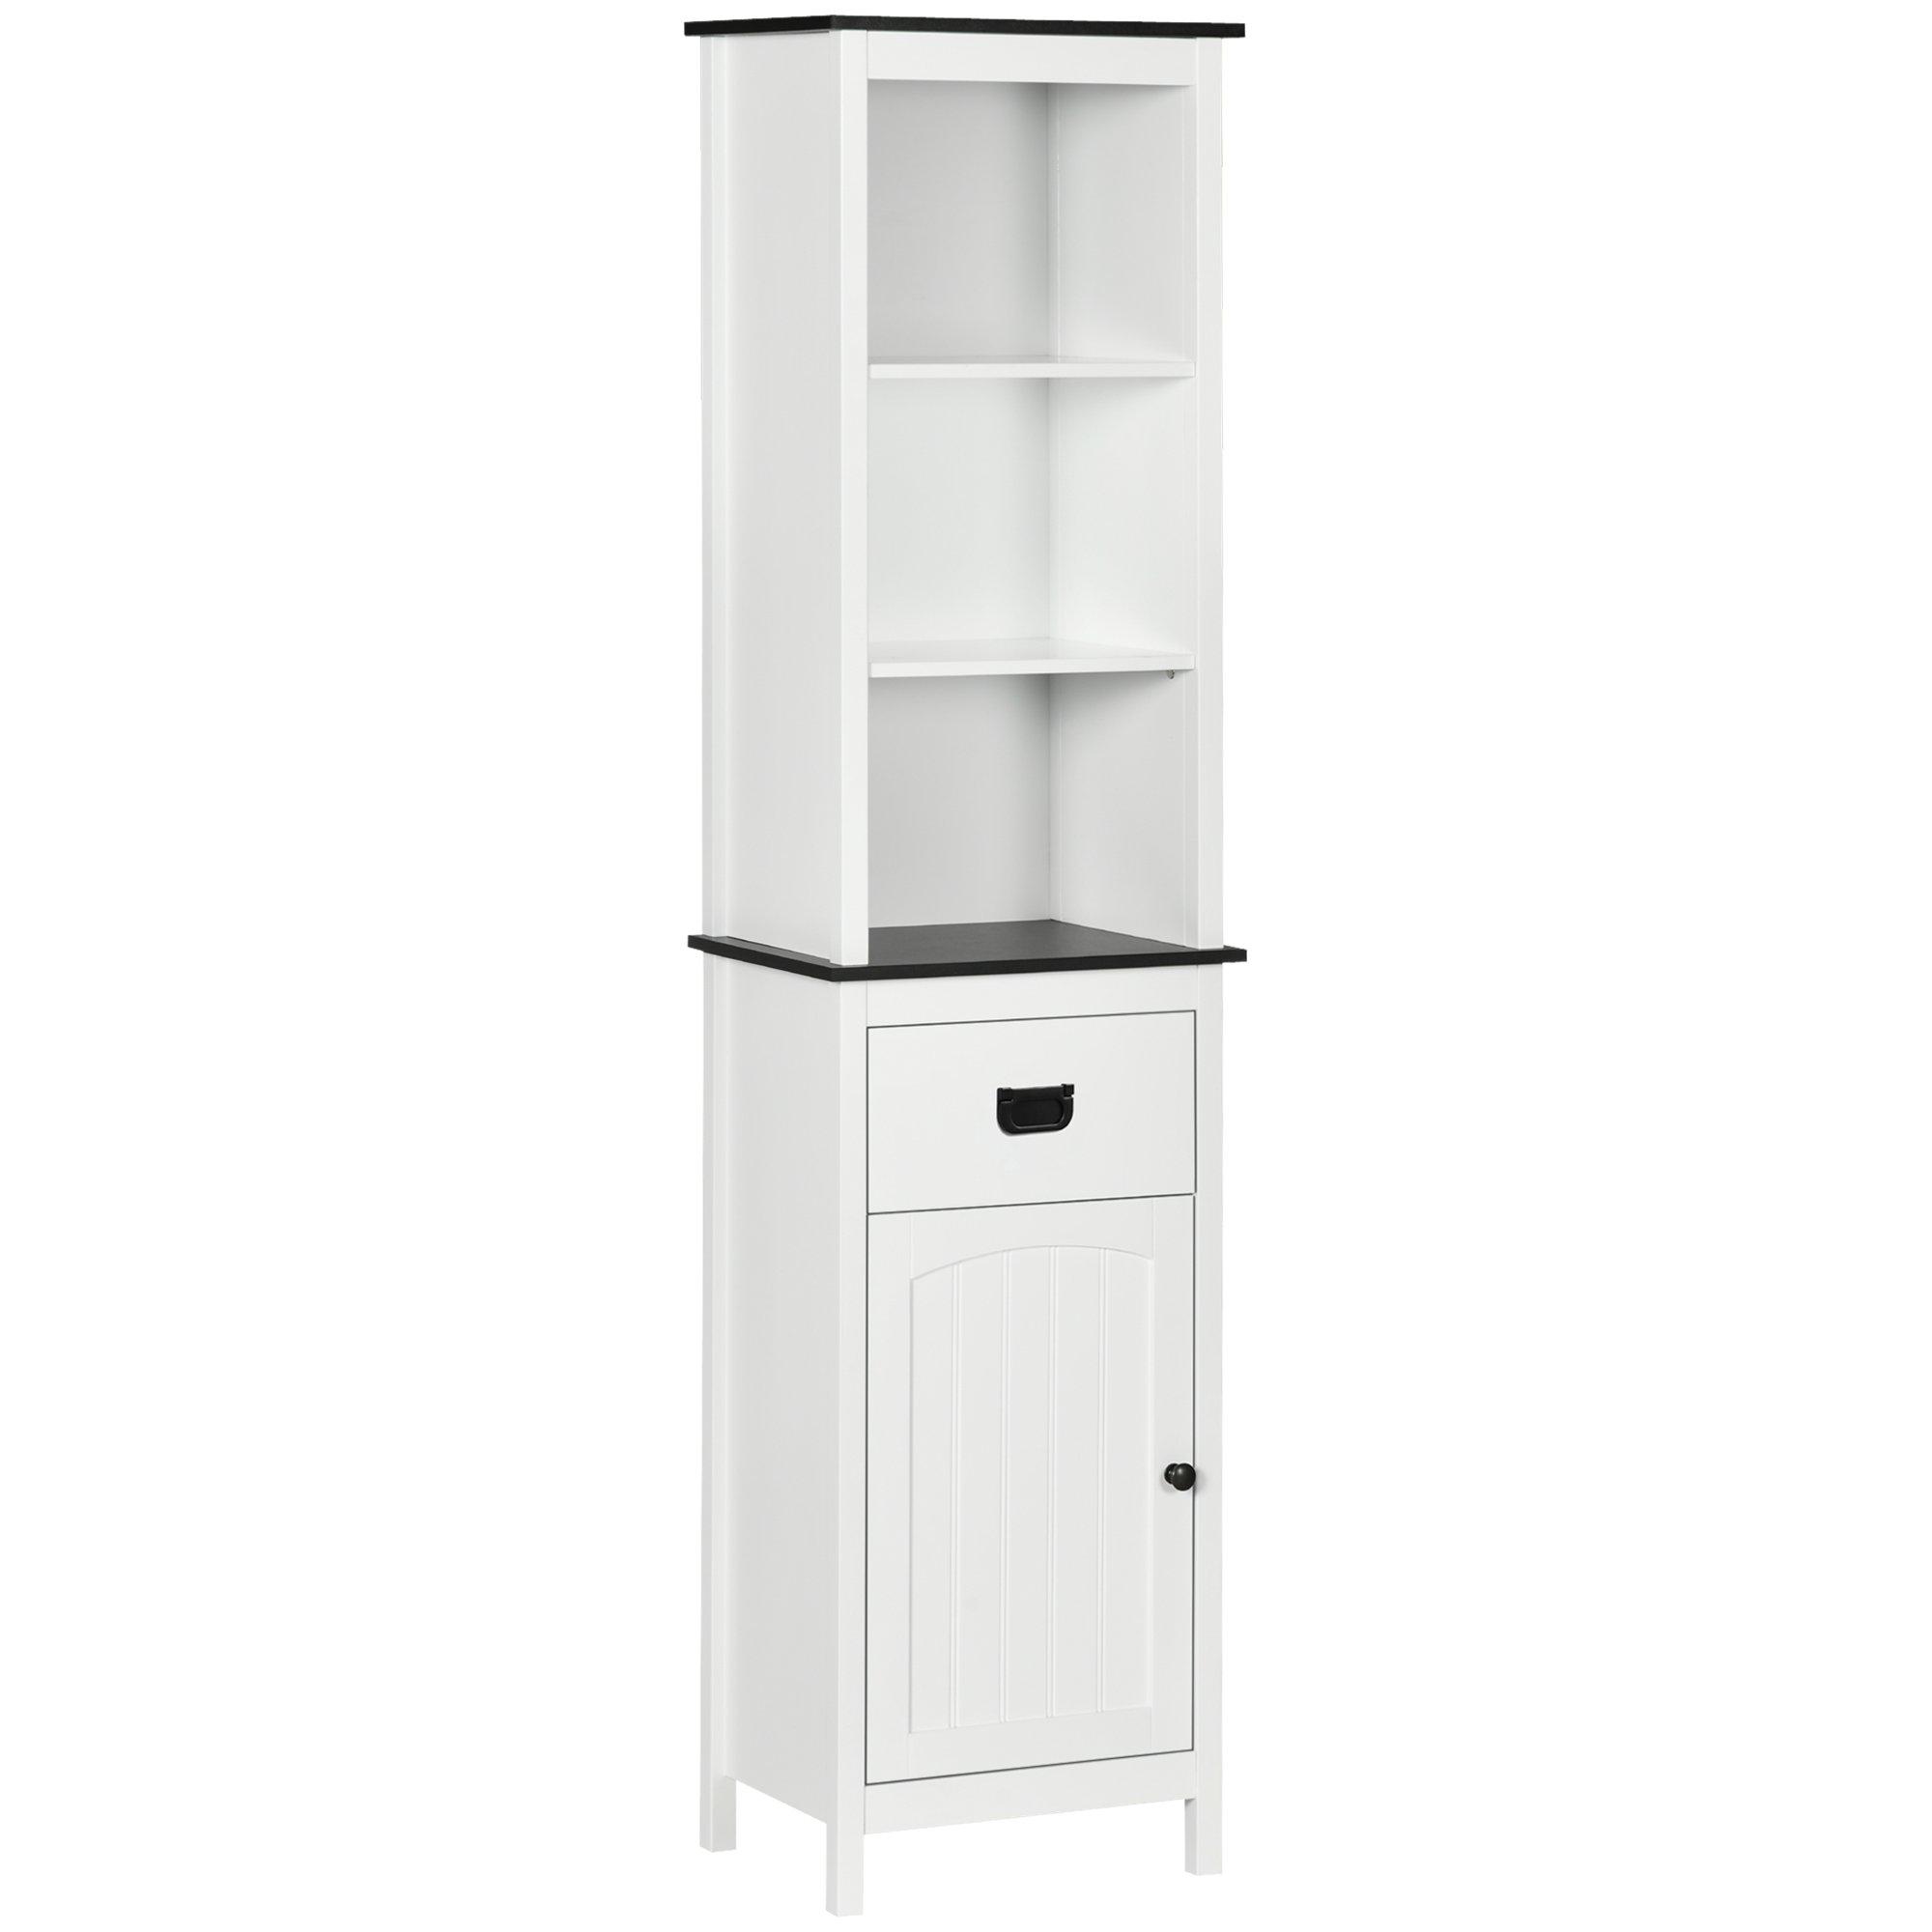 Freestanding Tall Bathroom Cabinet with Drawer and Adjustable Shelf